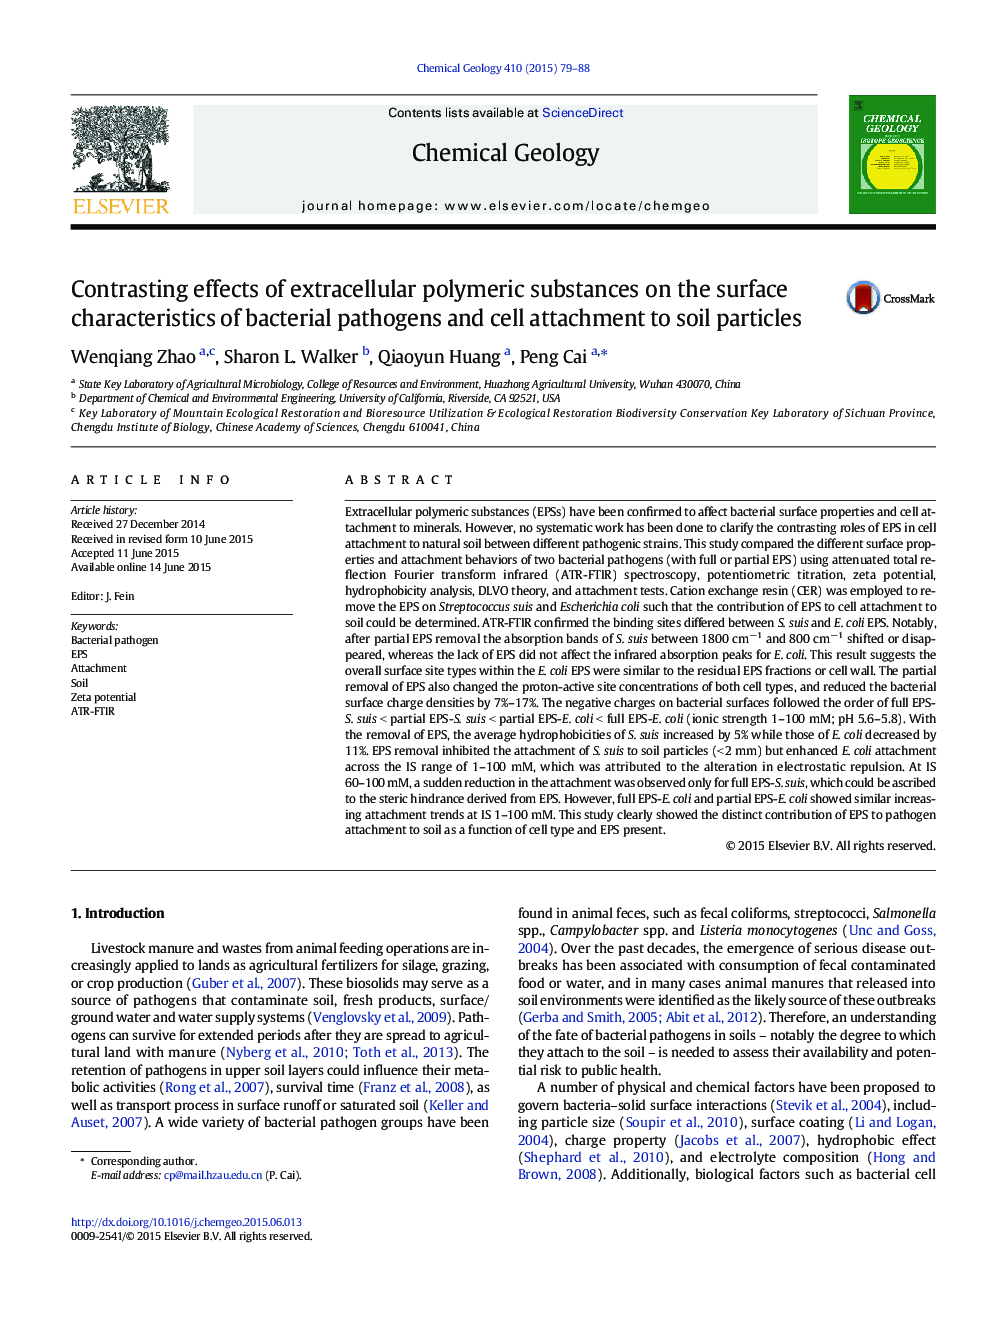 Contrasting effects of extracellular polymeric substances on the surface characteristics of bacterial pathogens and cell attachment to soil particles